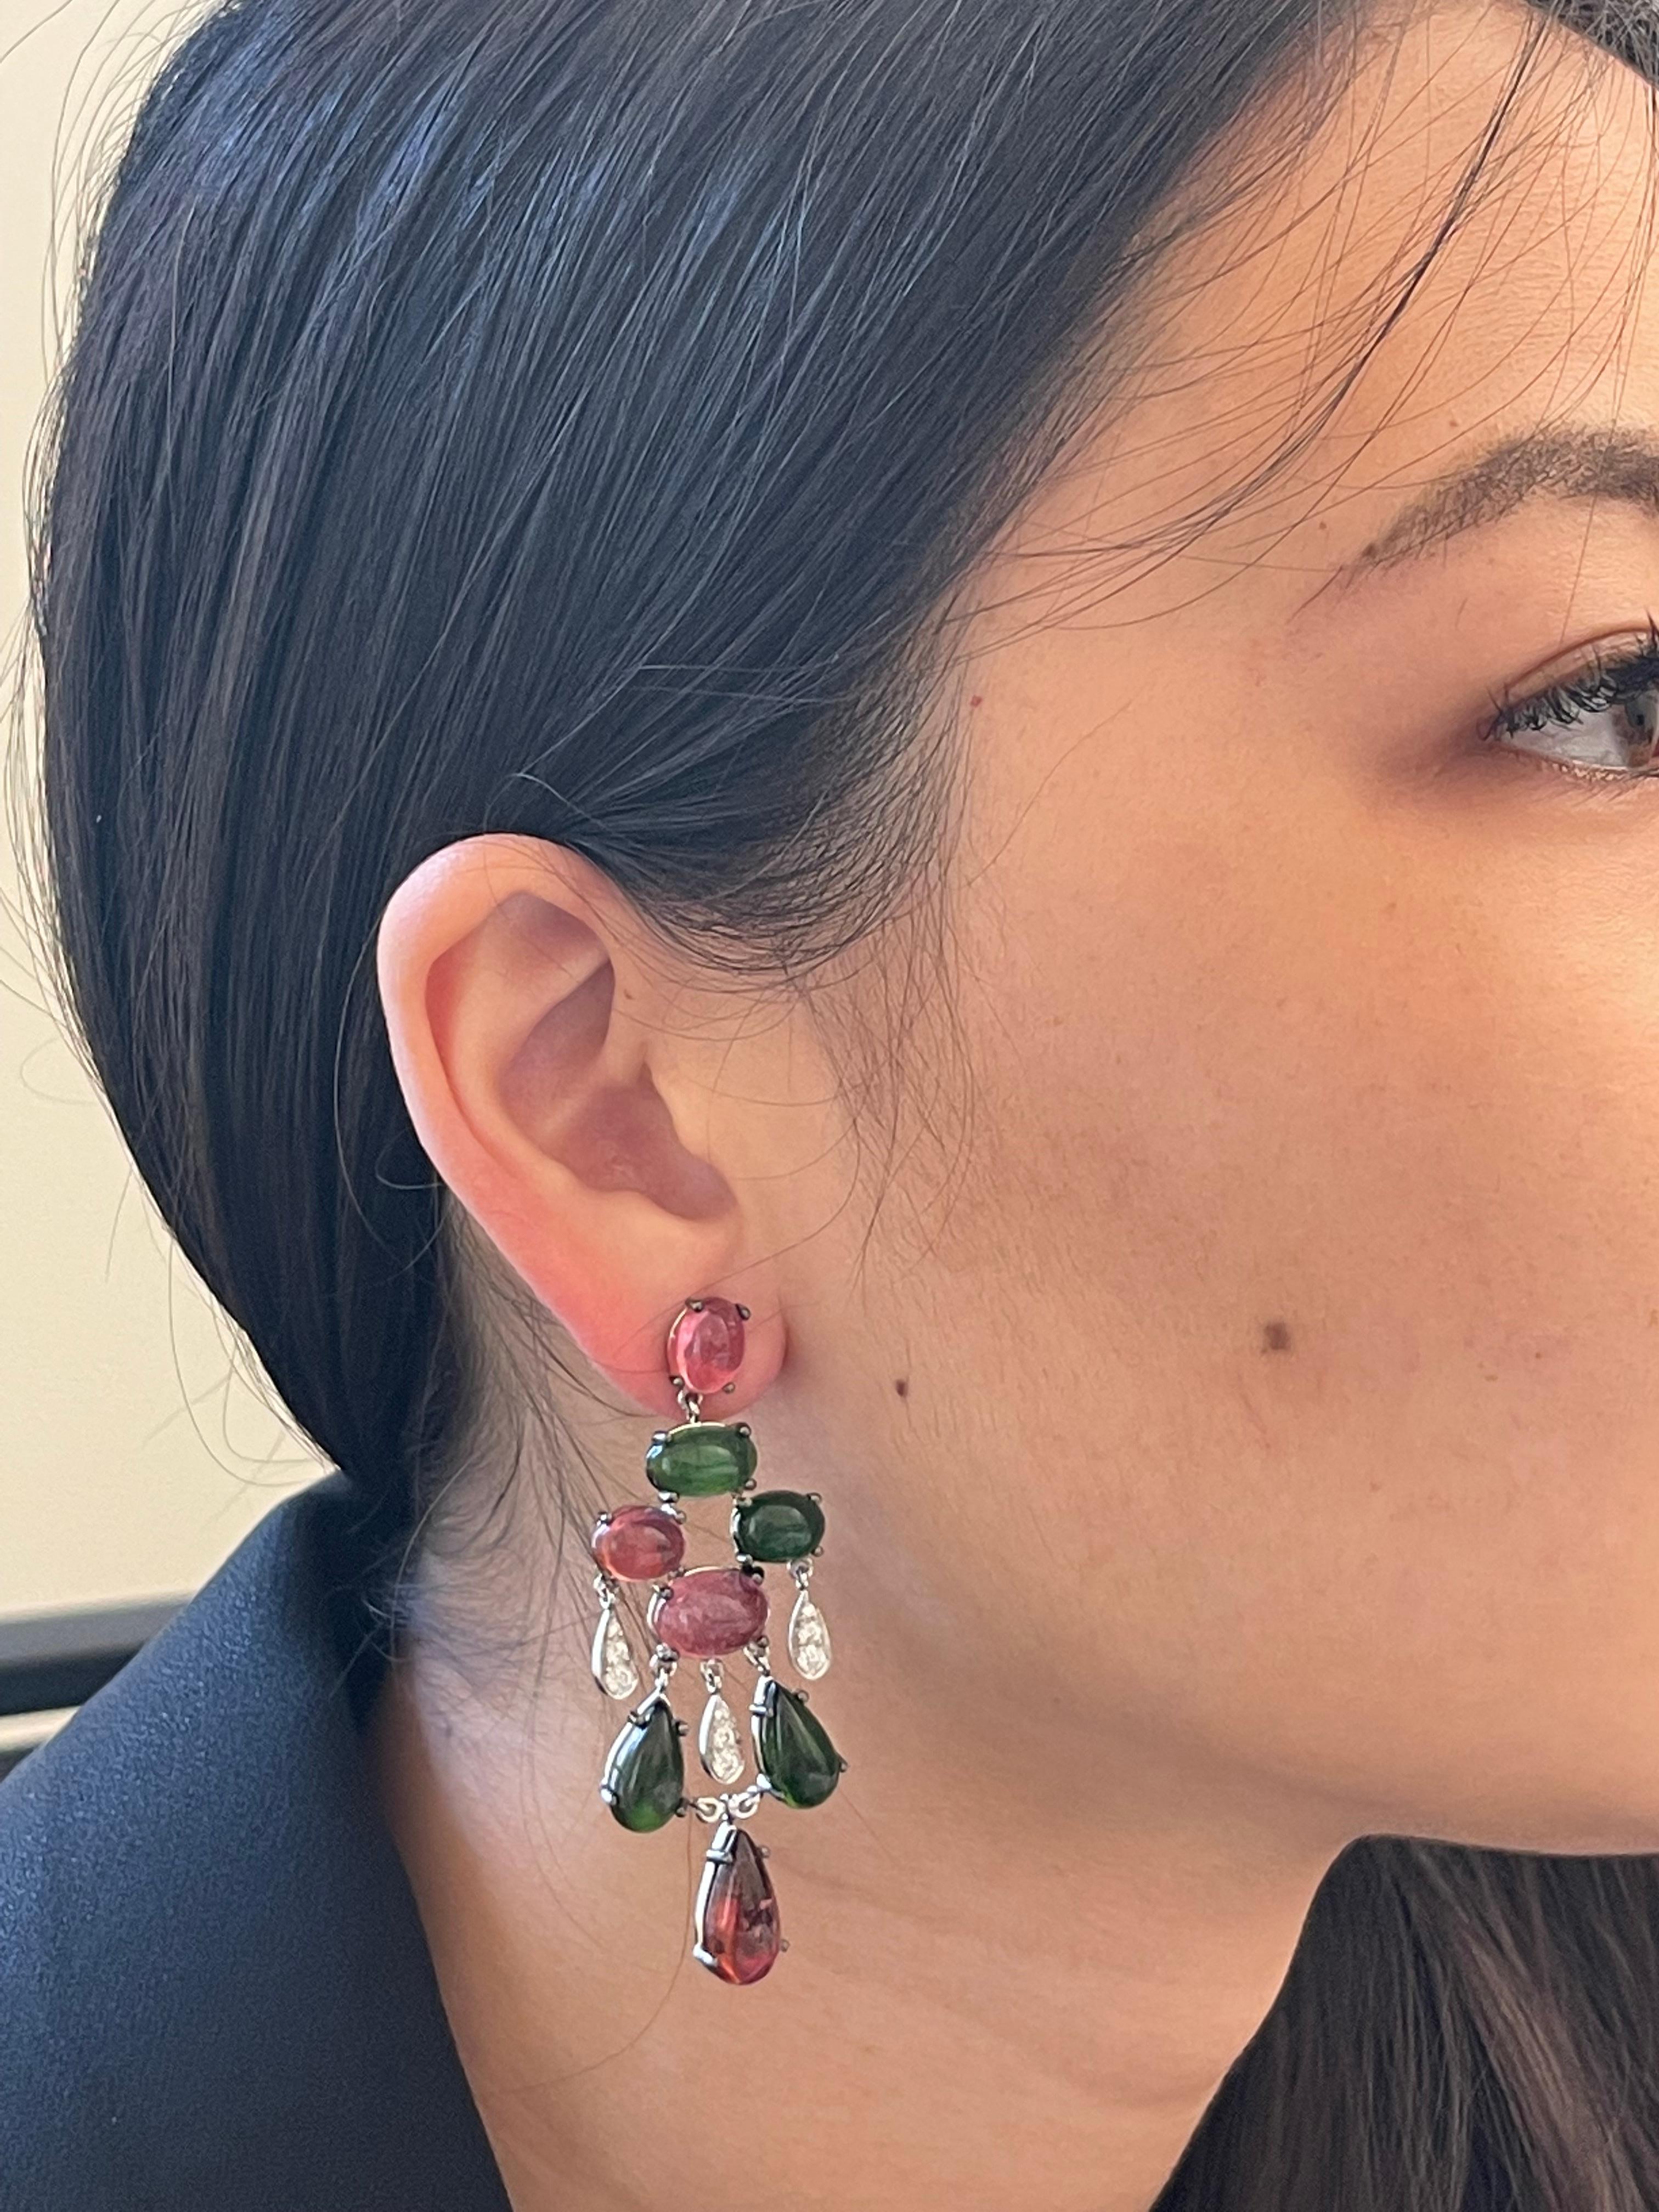 Earrings White Gold 18 K Gianni Lazzaro

Diamonds 18-0,71 ct HSI 
Tourmaline 16- 49,45 ct

With a heritage of ancient fine Swiss jewelry traditions, NATKINA is a Geneva-based jewelry brand that creates modern jewelry masterpieces suitable for